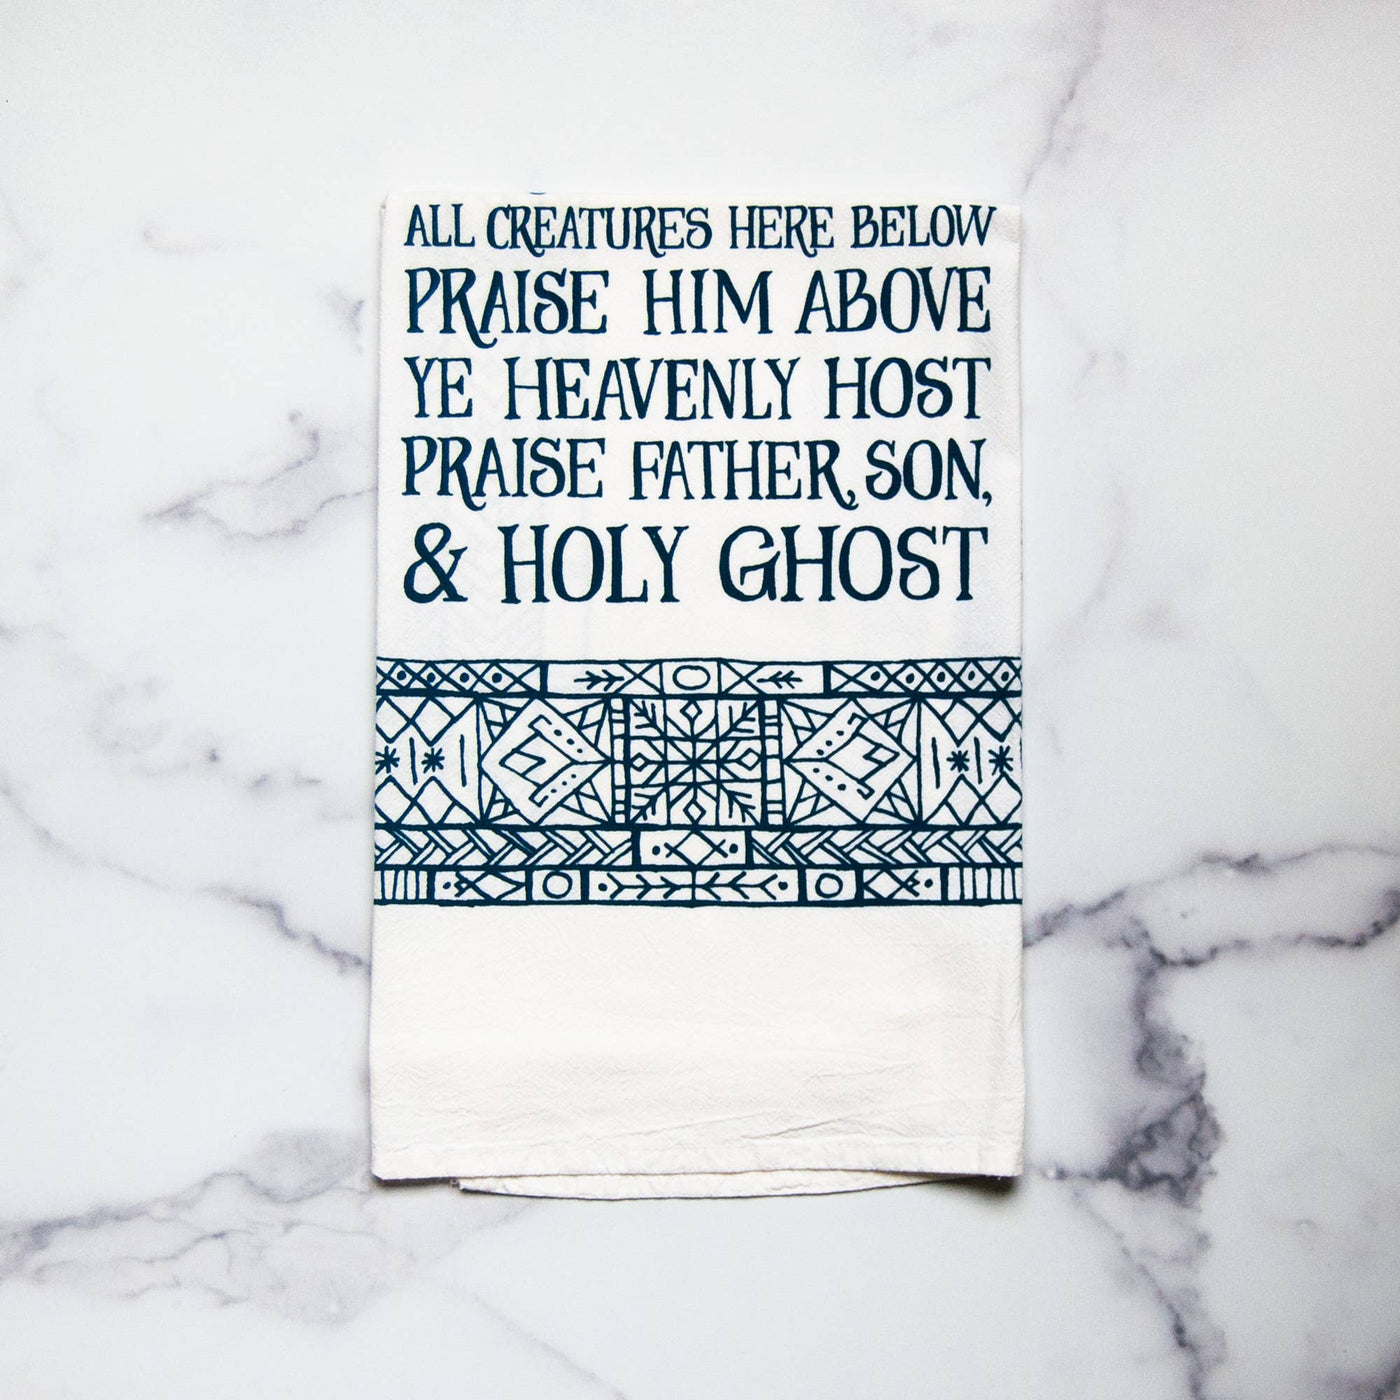 Doxology Hymn Tea Towely